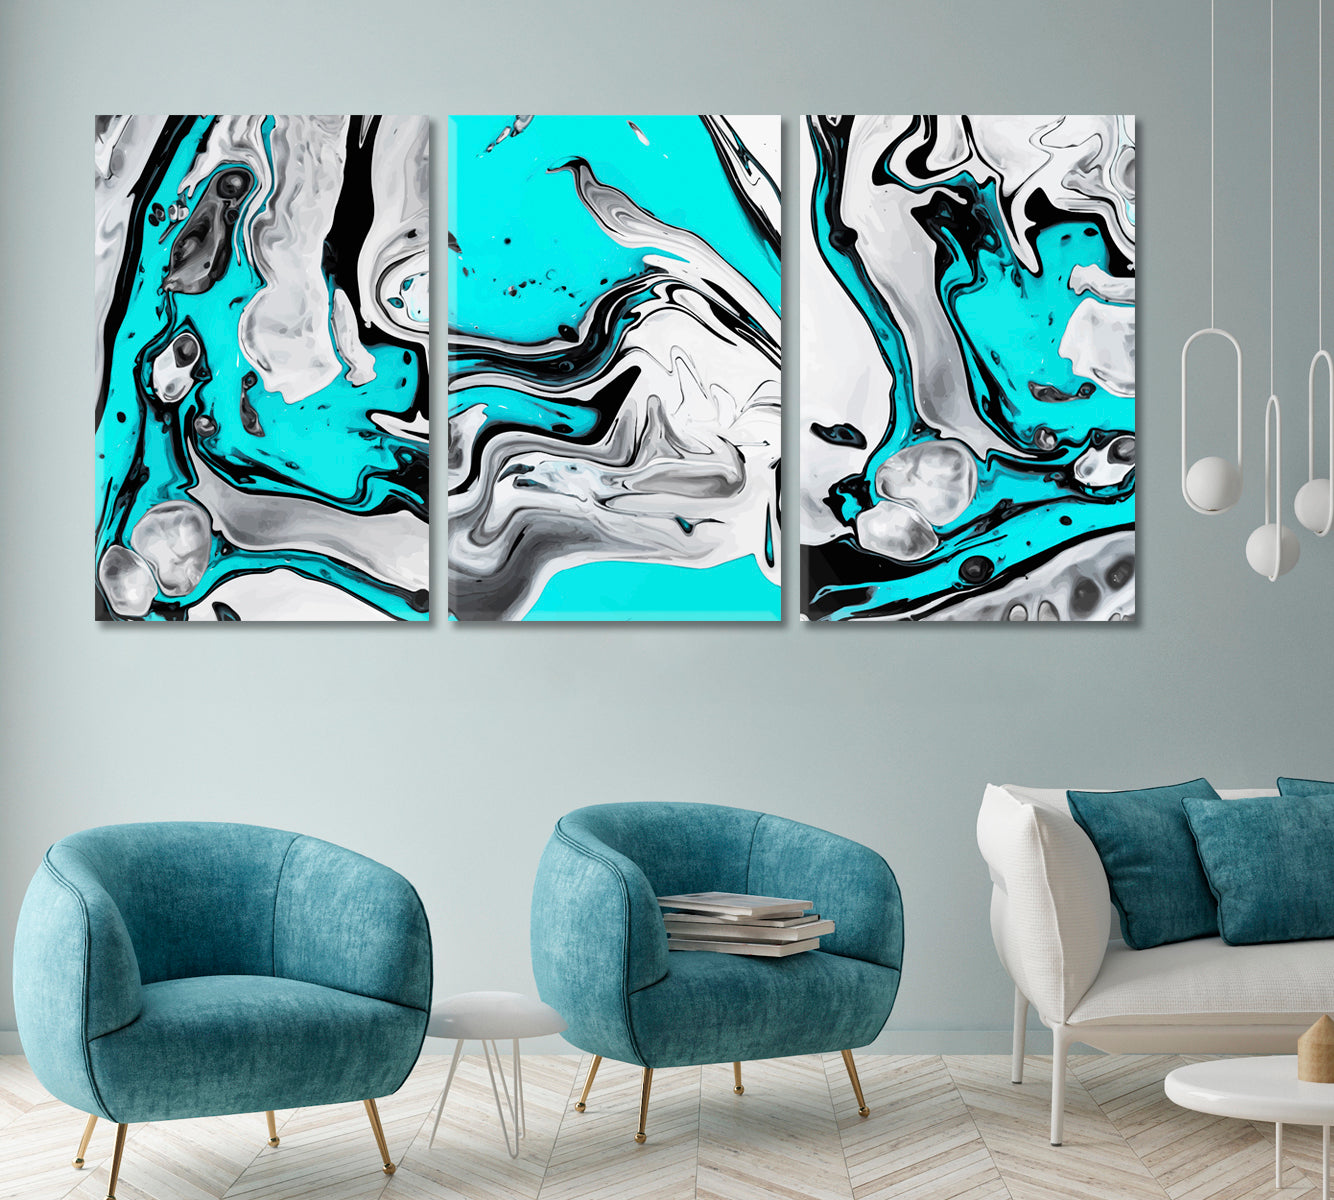 Set of 3 Abstract Aquamarine Fluid Marble Waves Canvas Print ArtLexy 3 Panels 48”x24” inches 